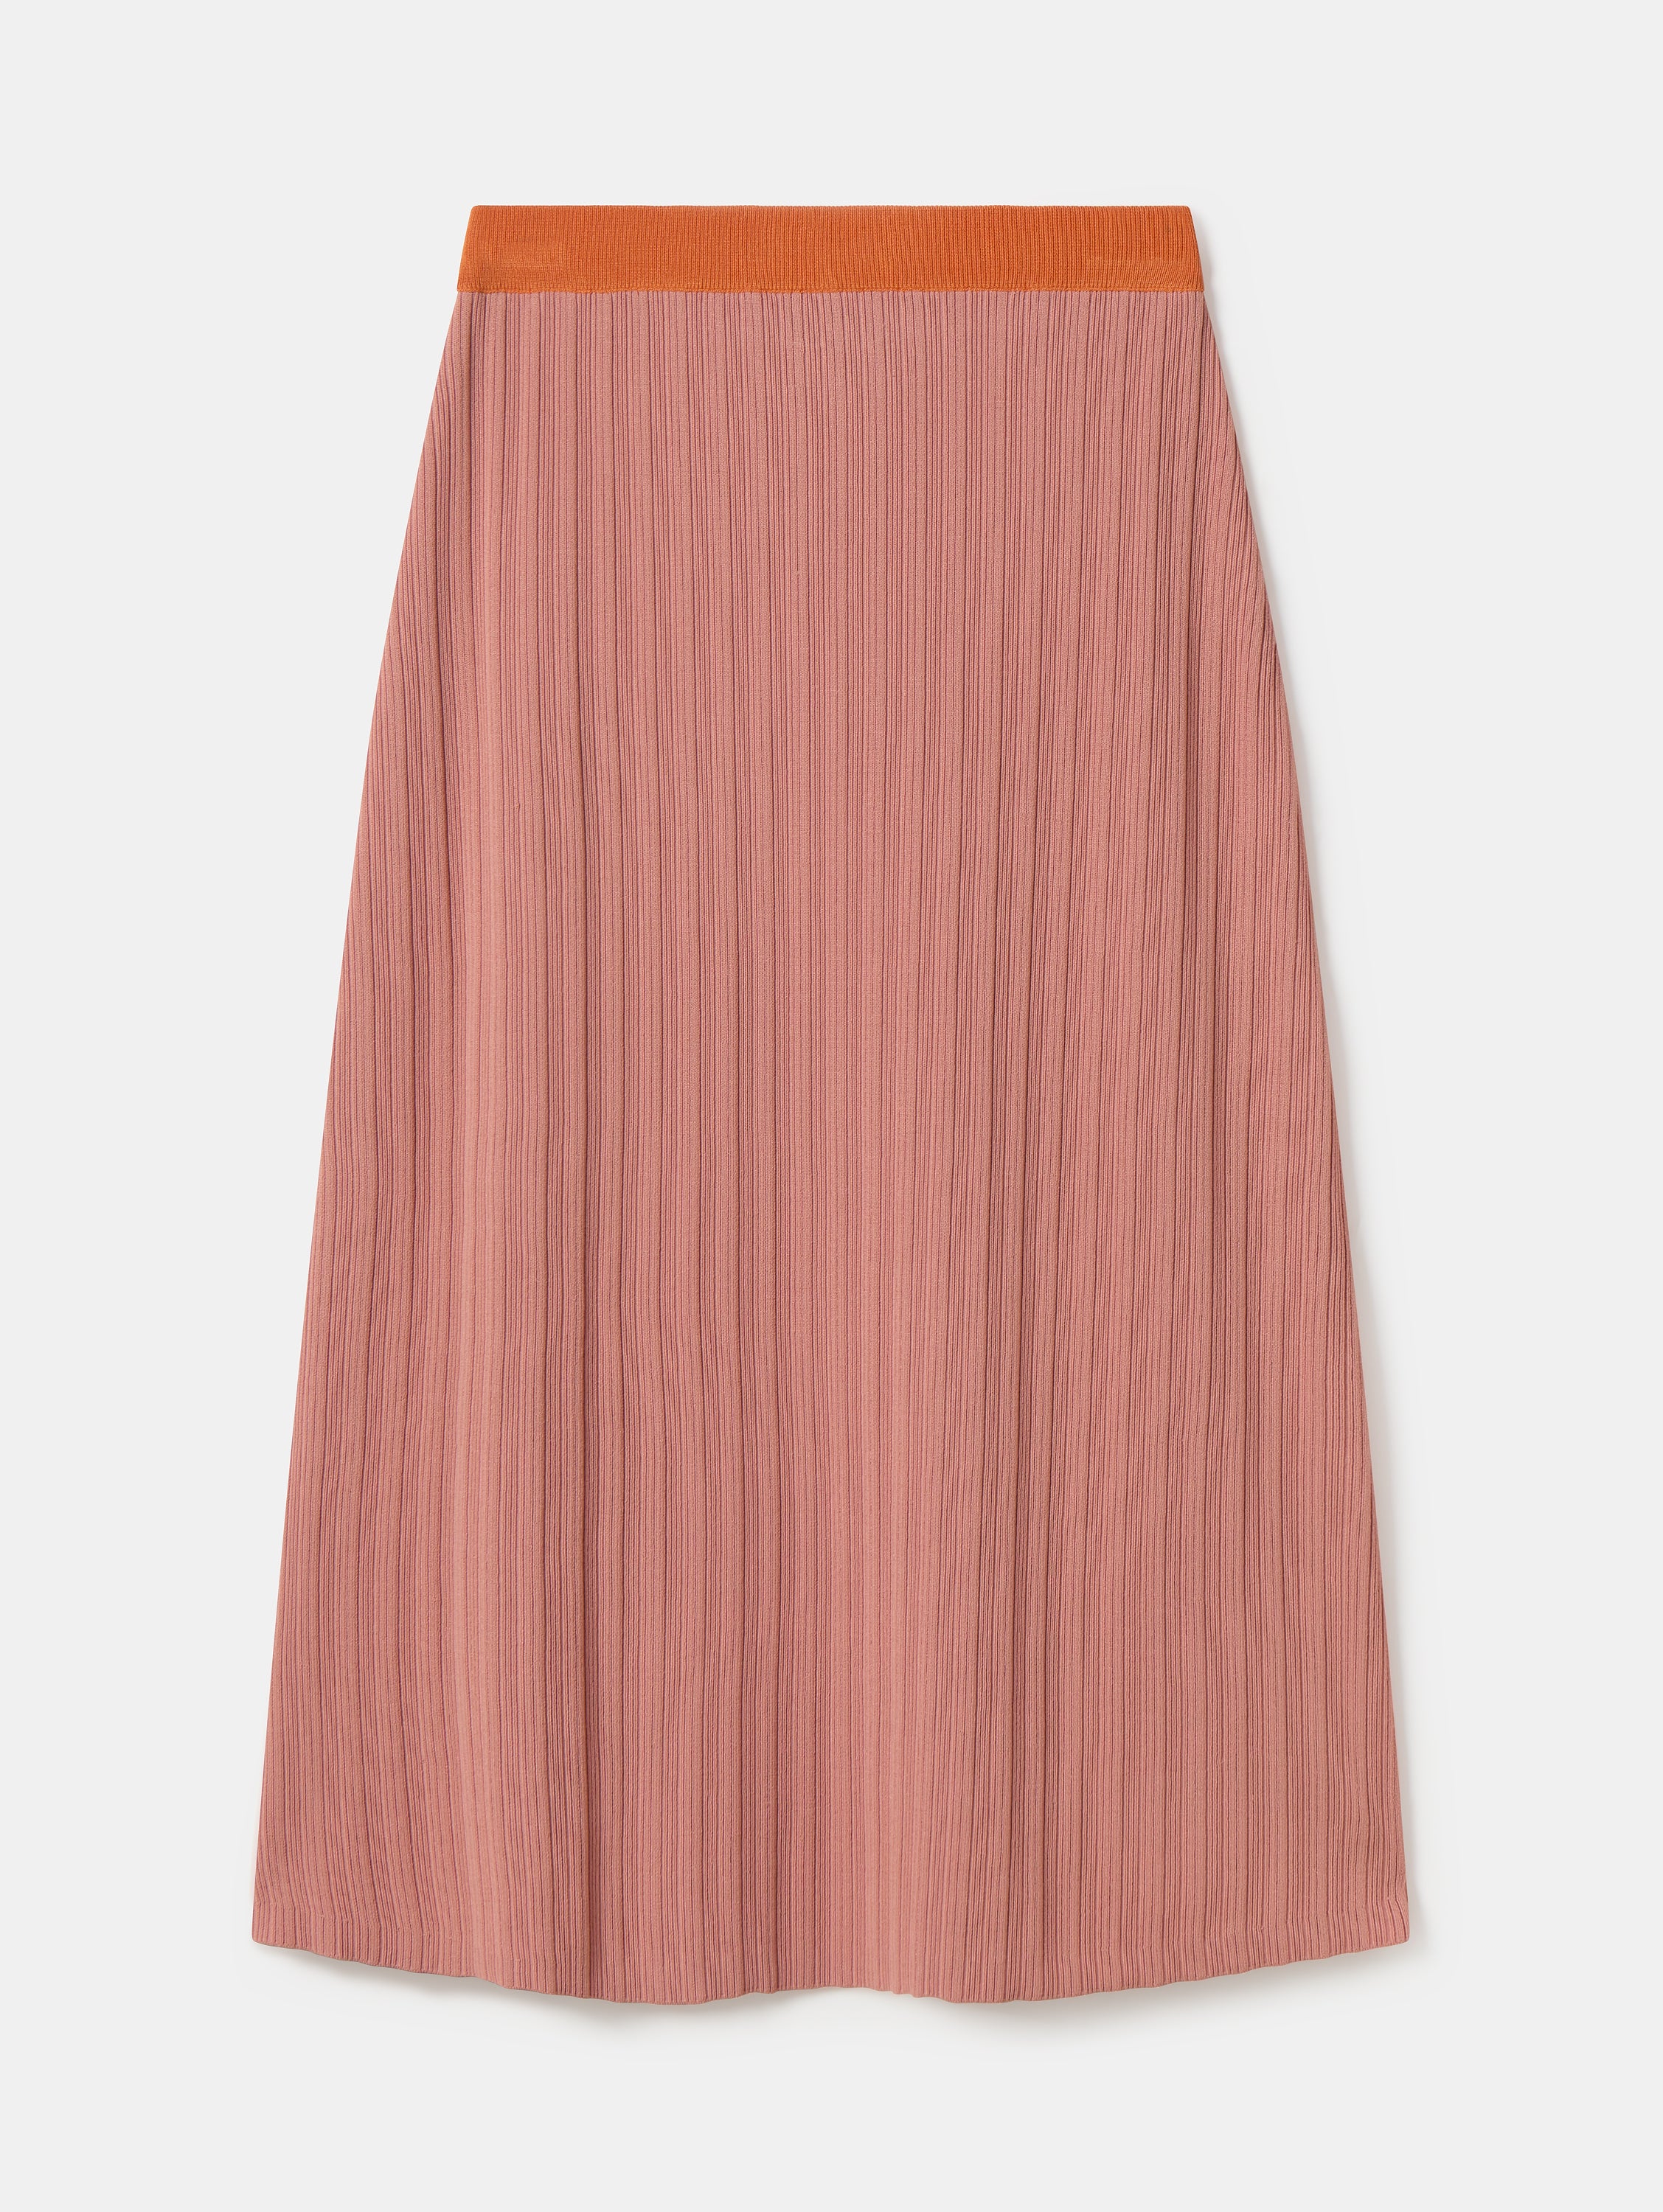 SKIRT TRICOT PINK 